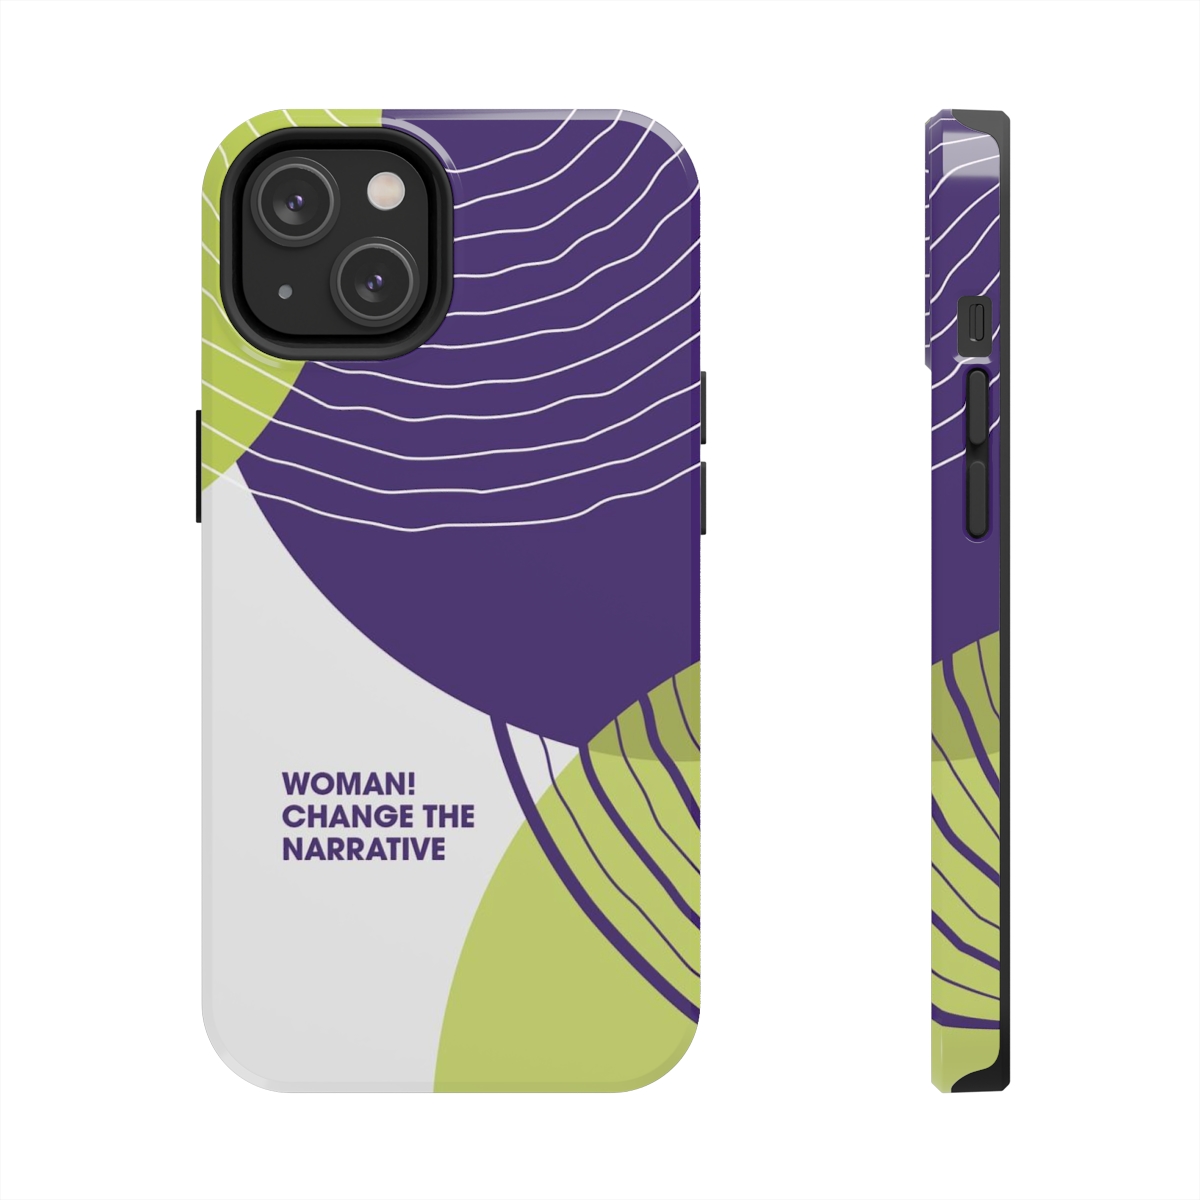 IWI iPhone Cases